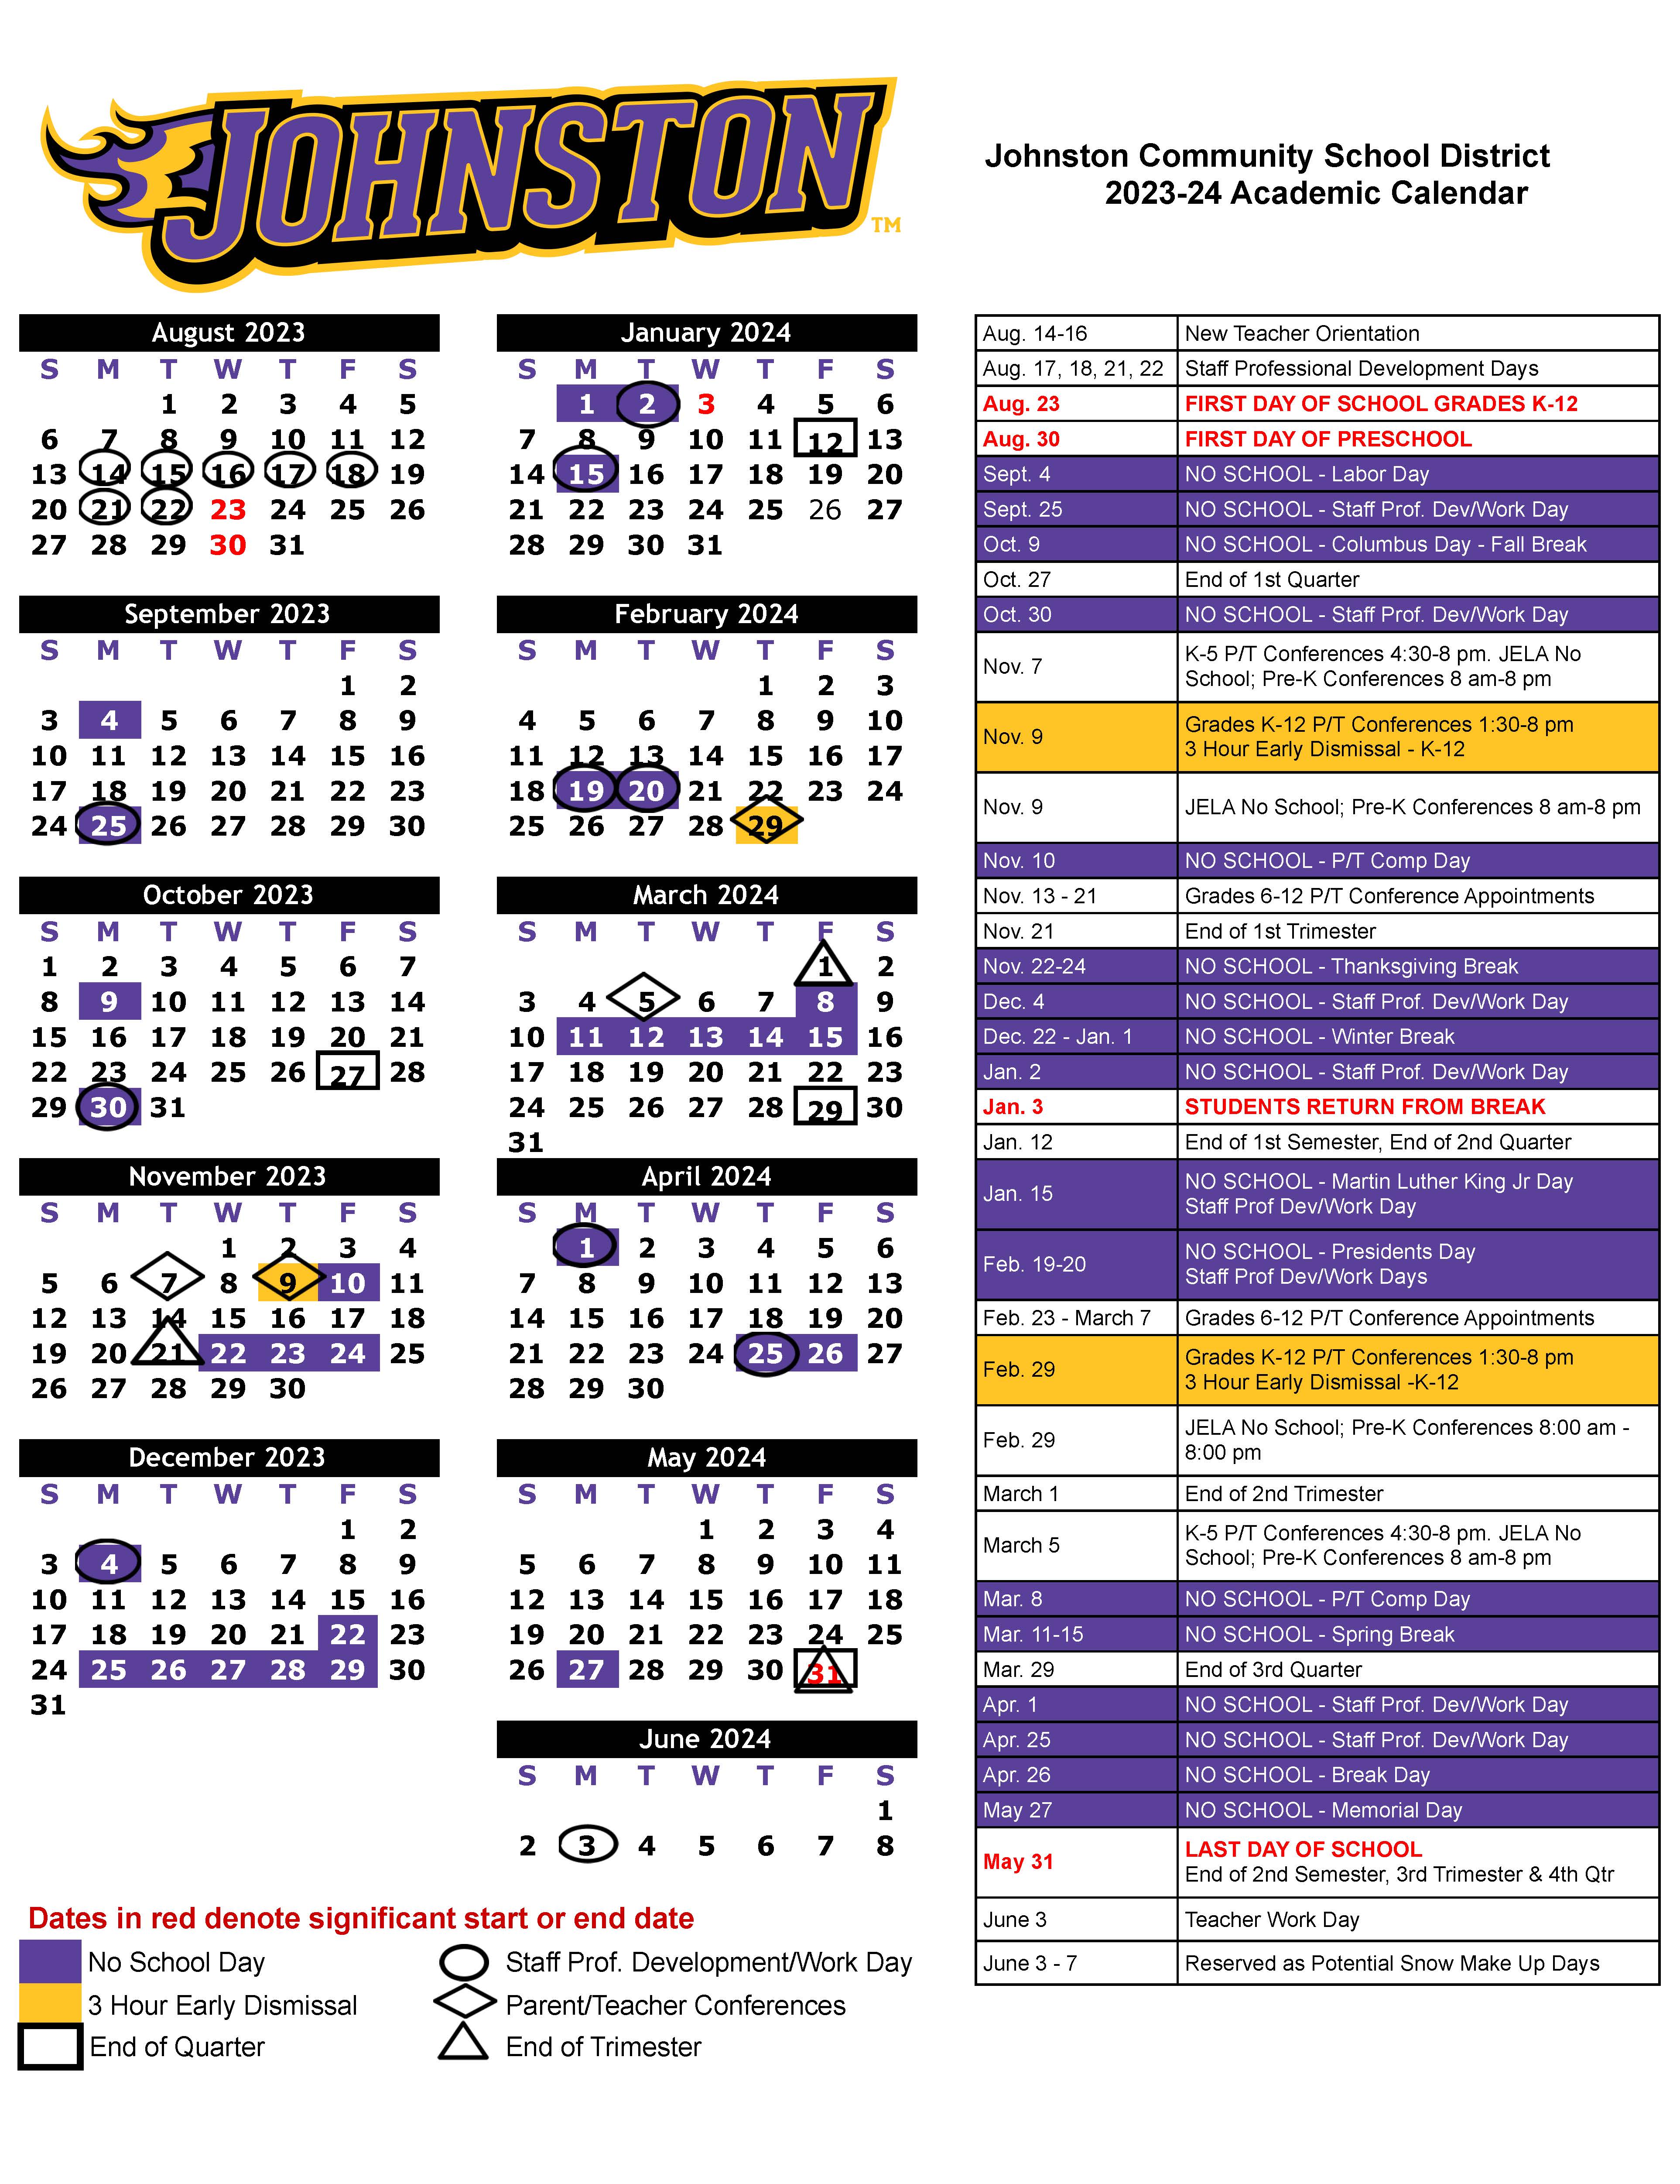 academic-calendar-approved-for-2023-24-johnston-community-school-district